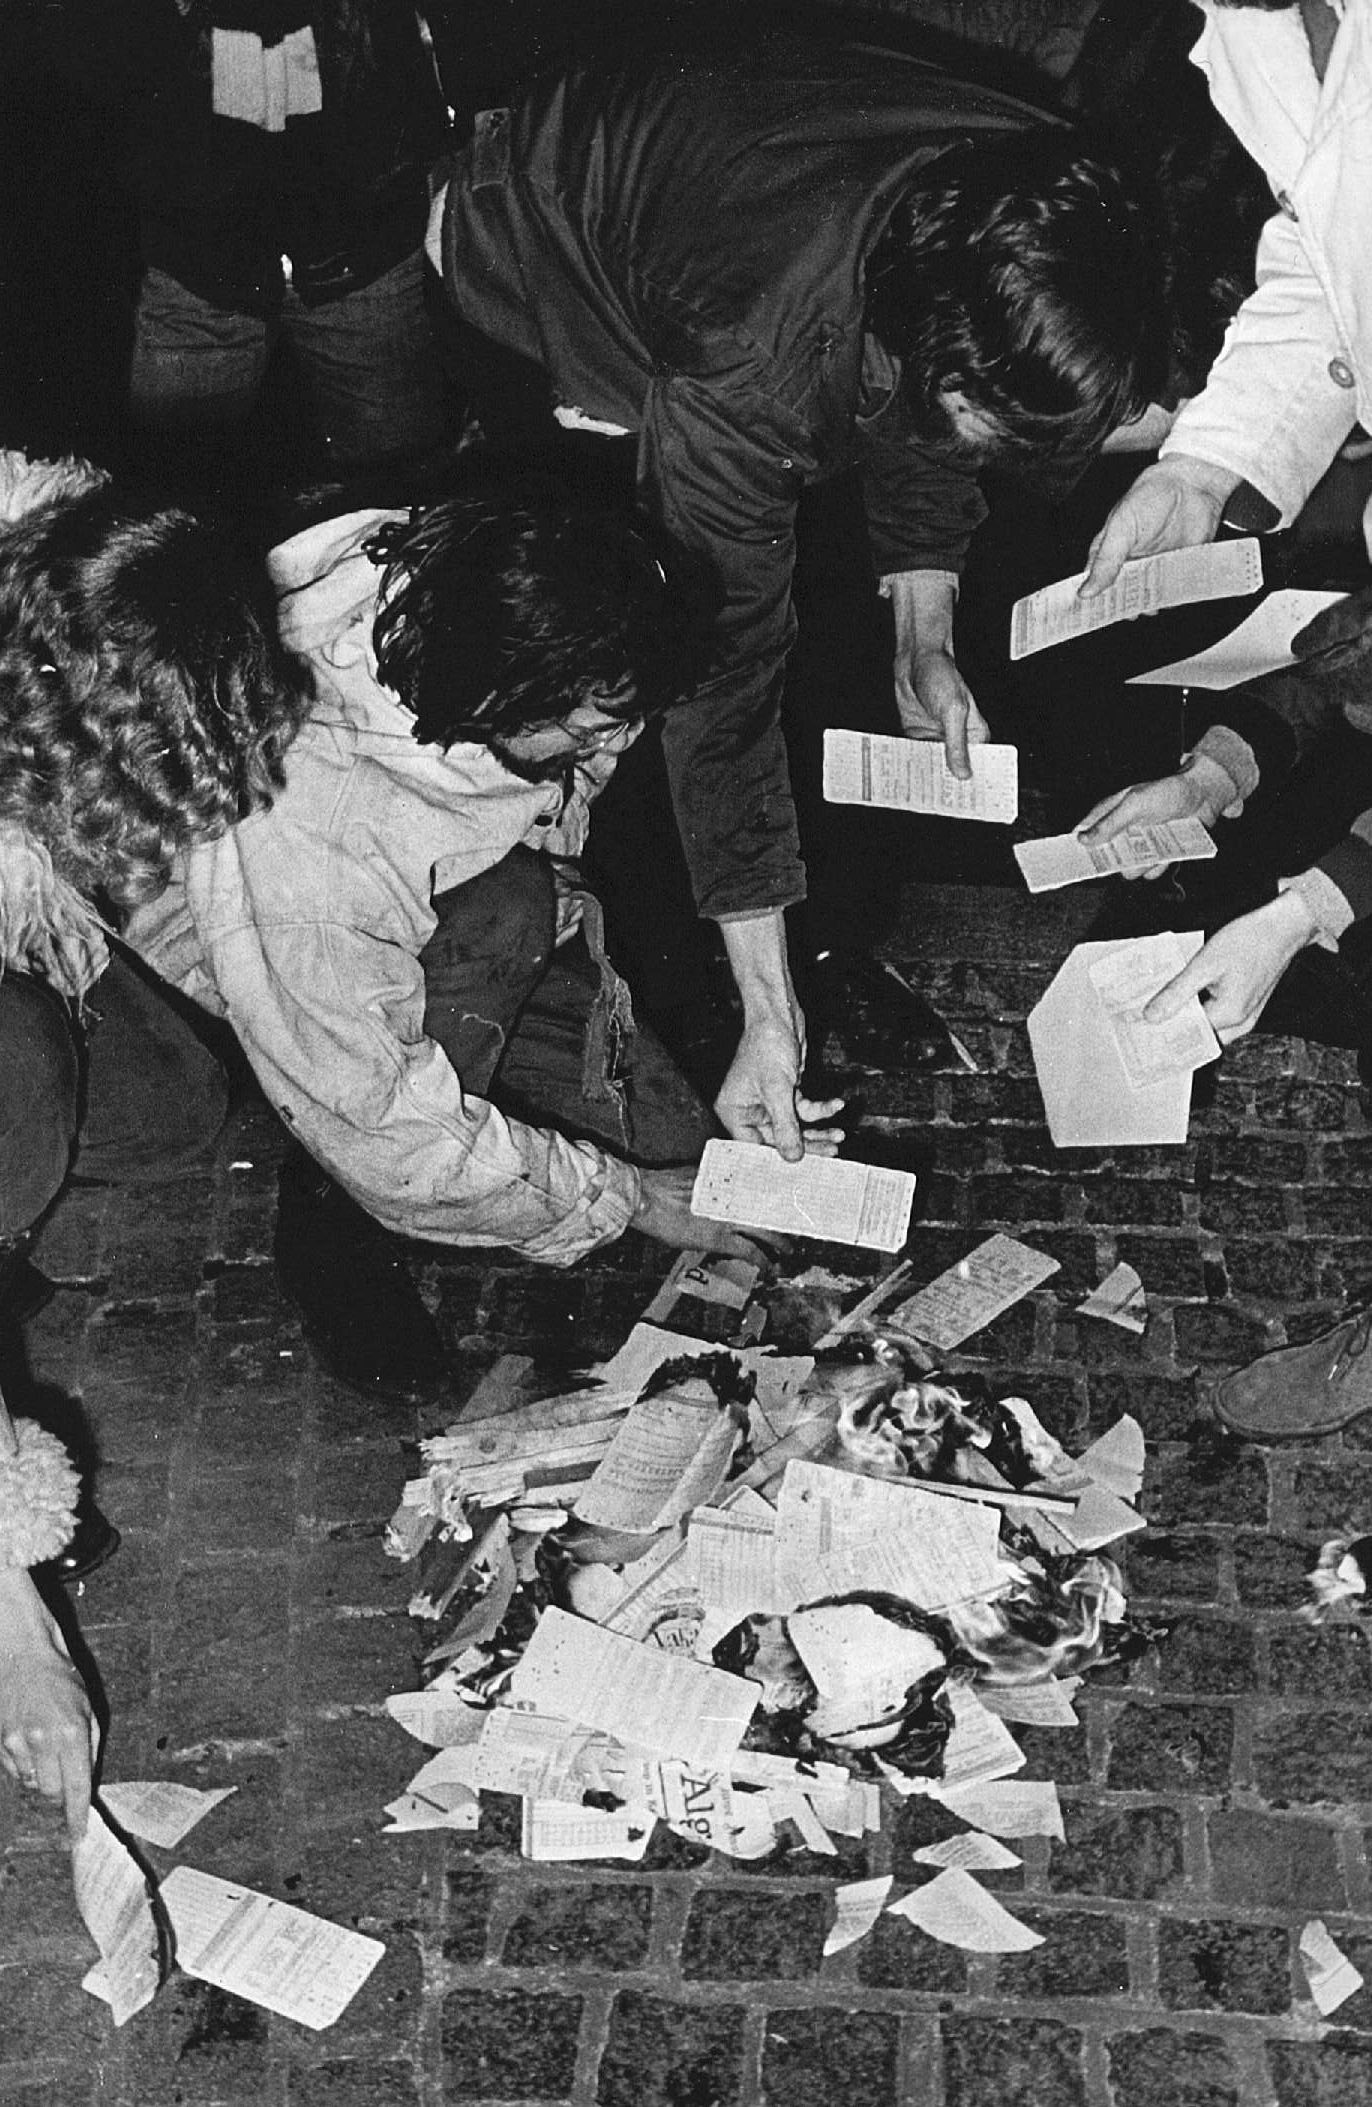 Census forms burned in the street